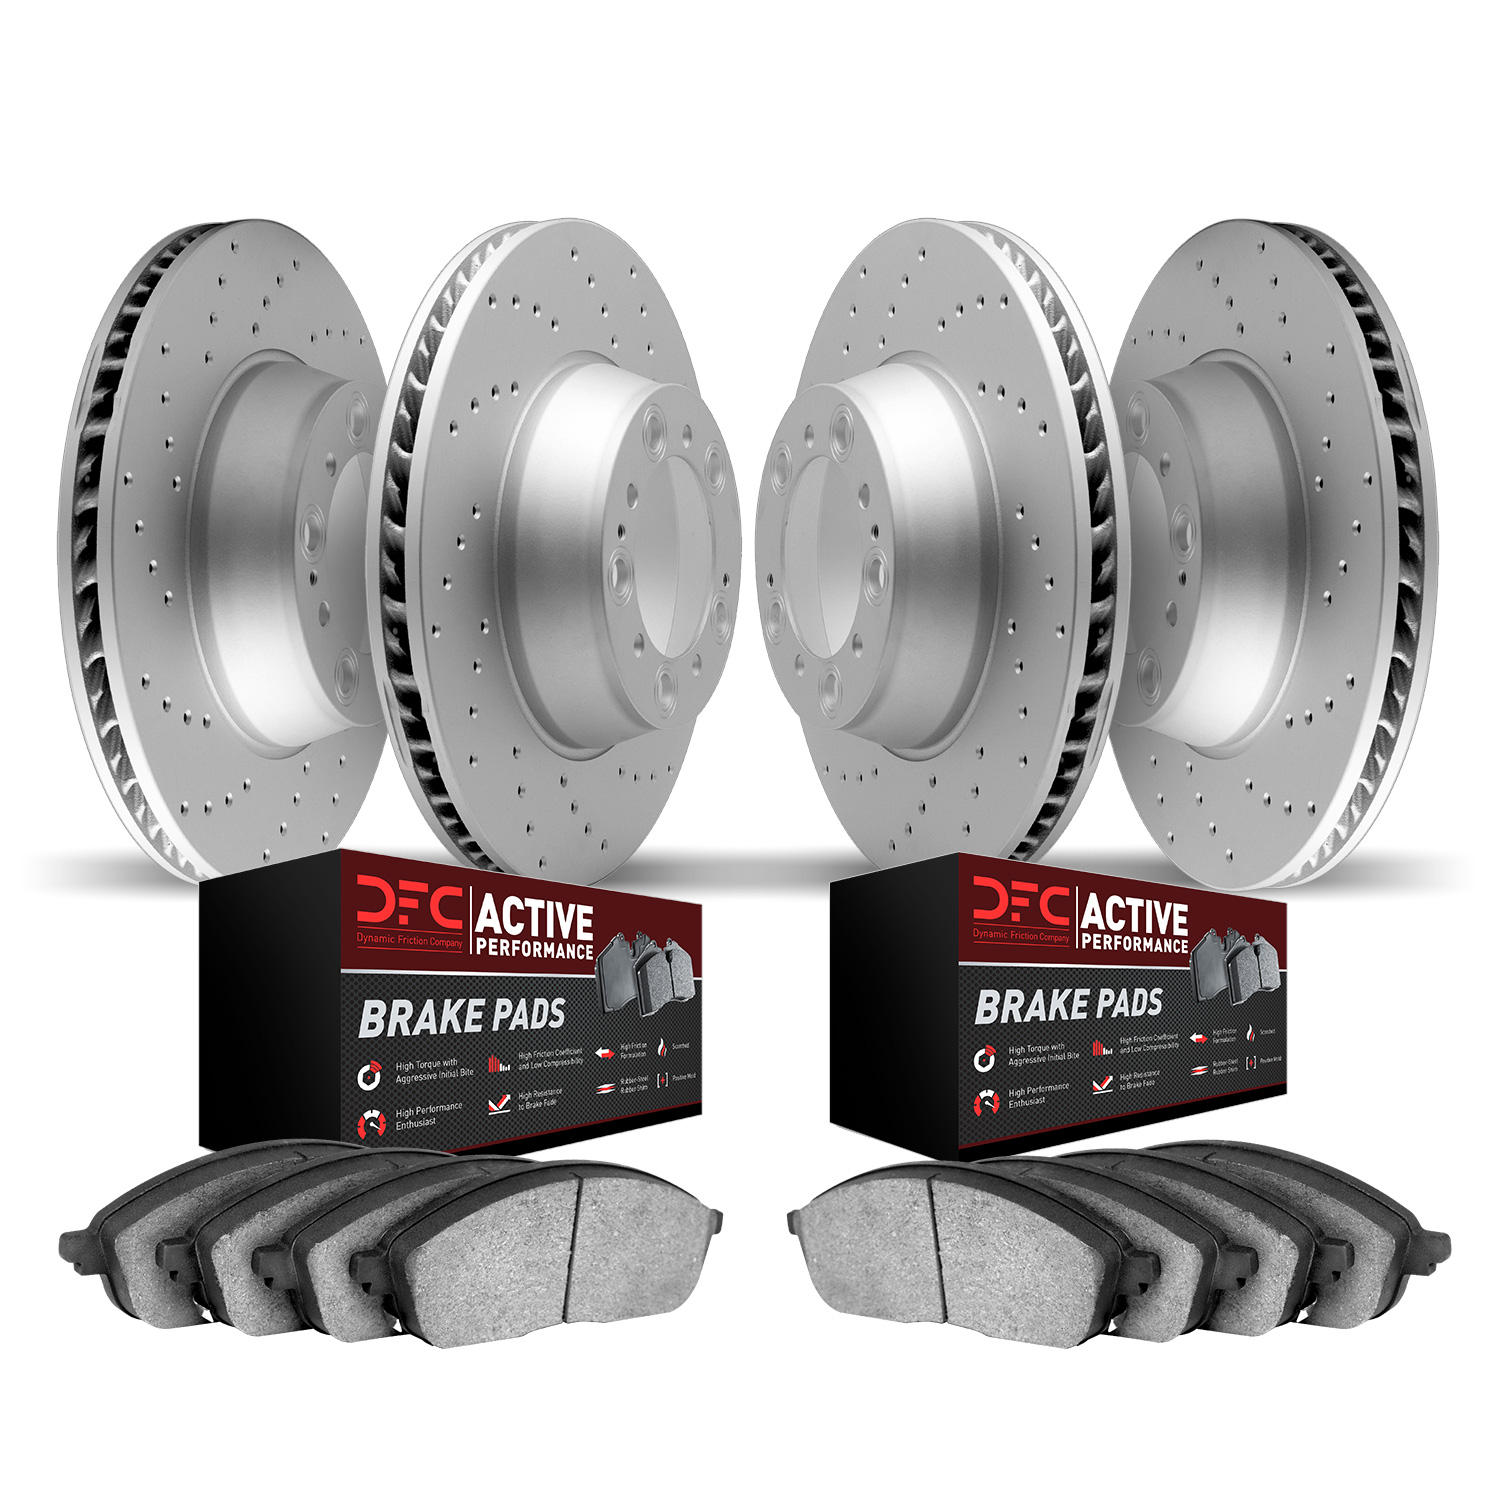 2704-67047 Geoperformance Drilled Brake Rotors with Active Performance Pads Kit, 2014-2017 Infiniti/Nissan, Position: Front and